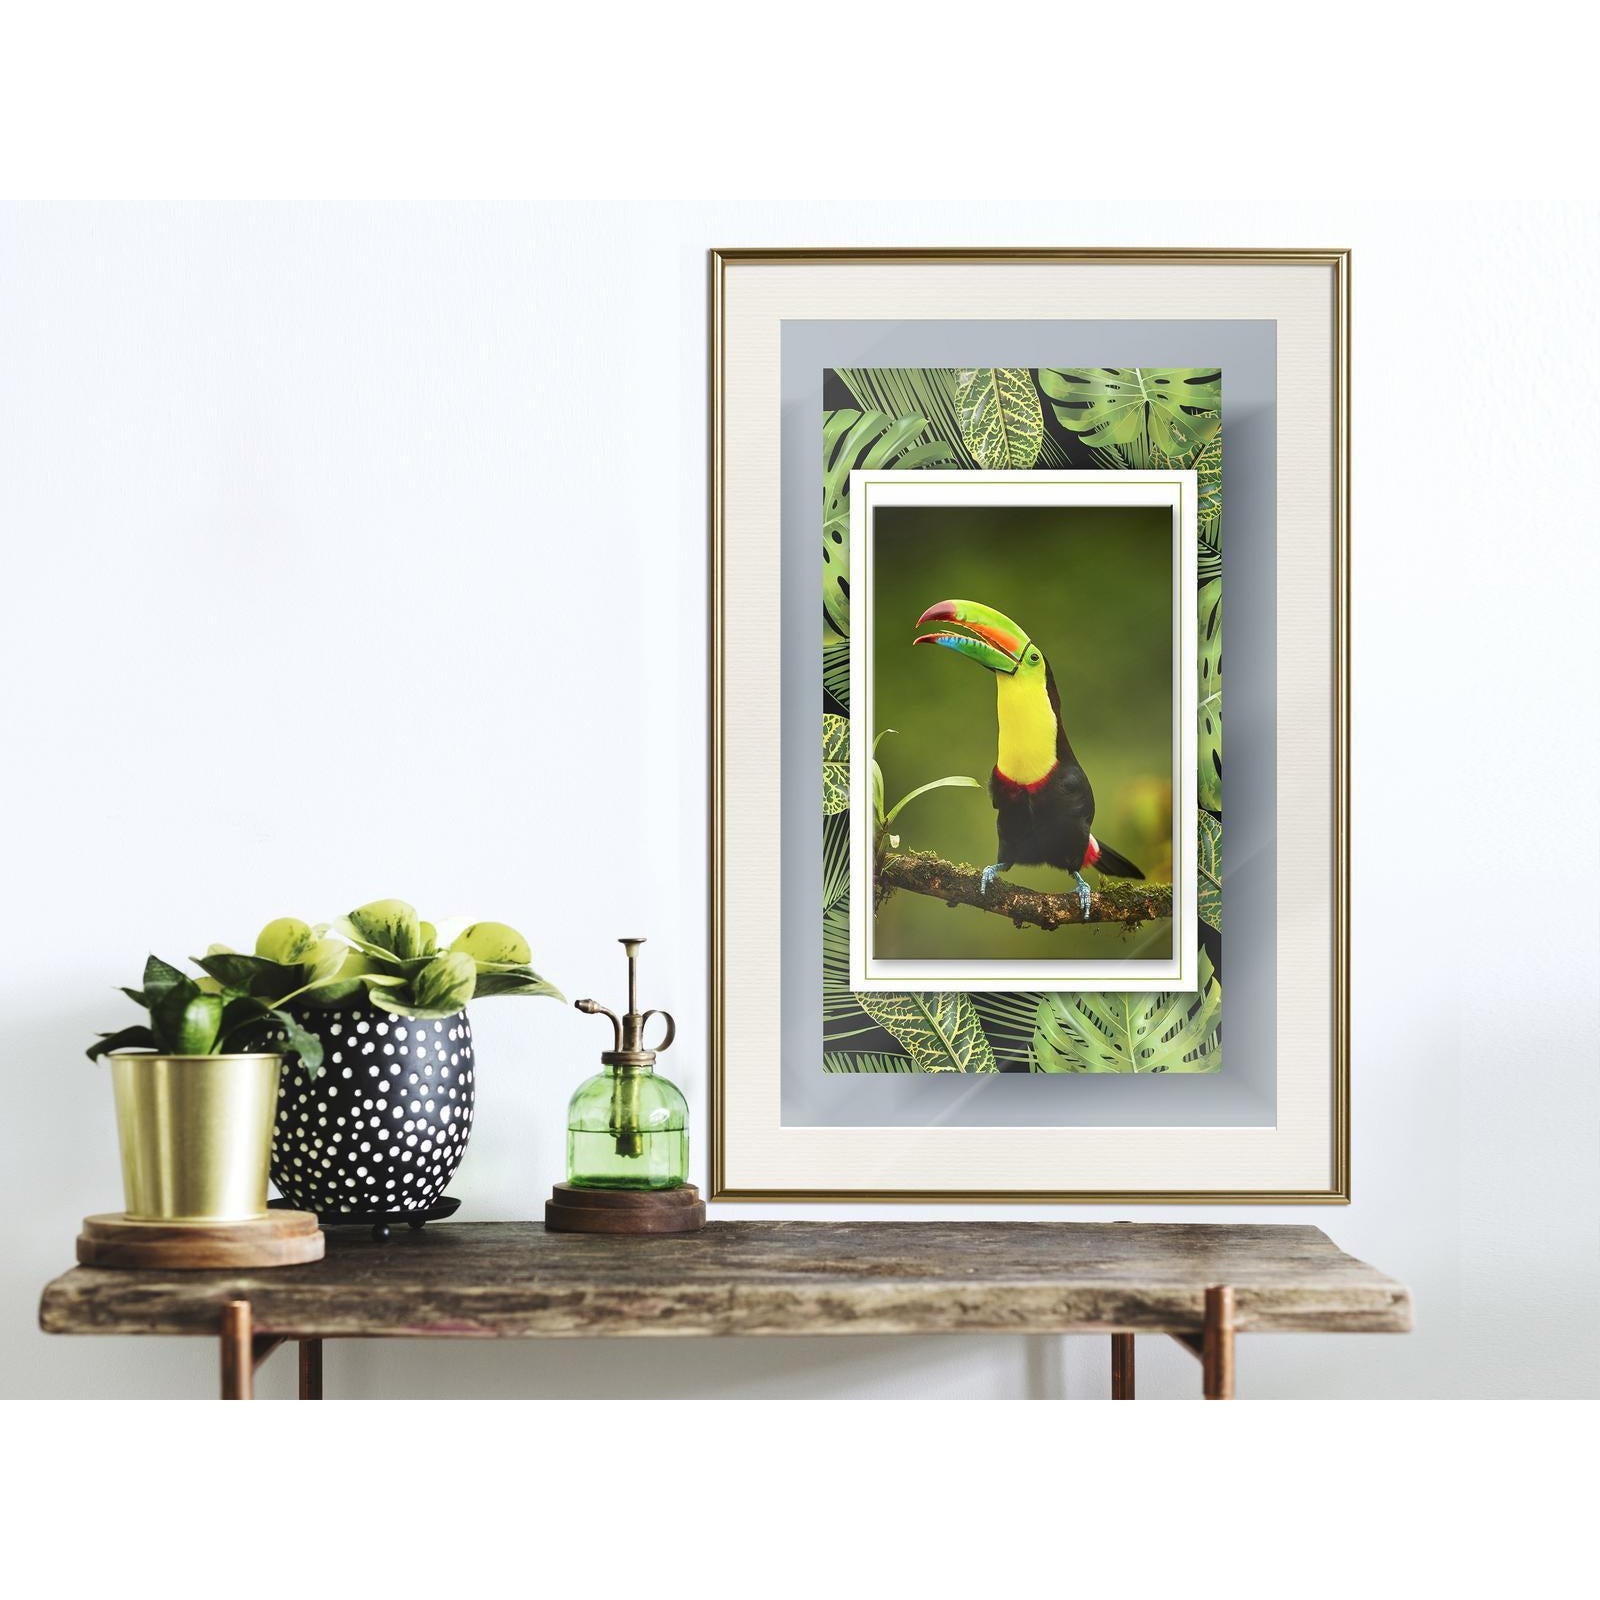 Inramad Poster / Tavla - Toucan in the Frame-Poster Inramad-Artgeist-peaceofhome.se